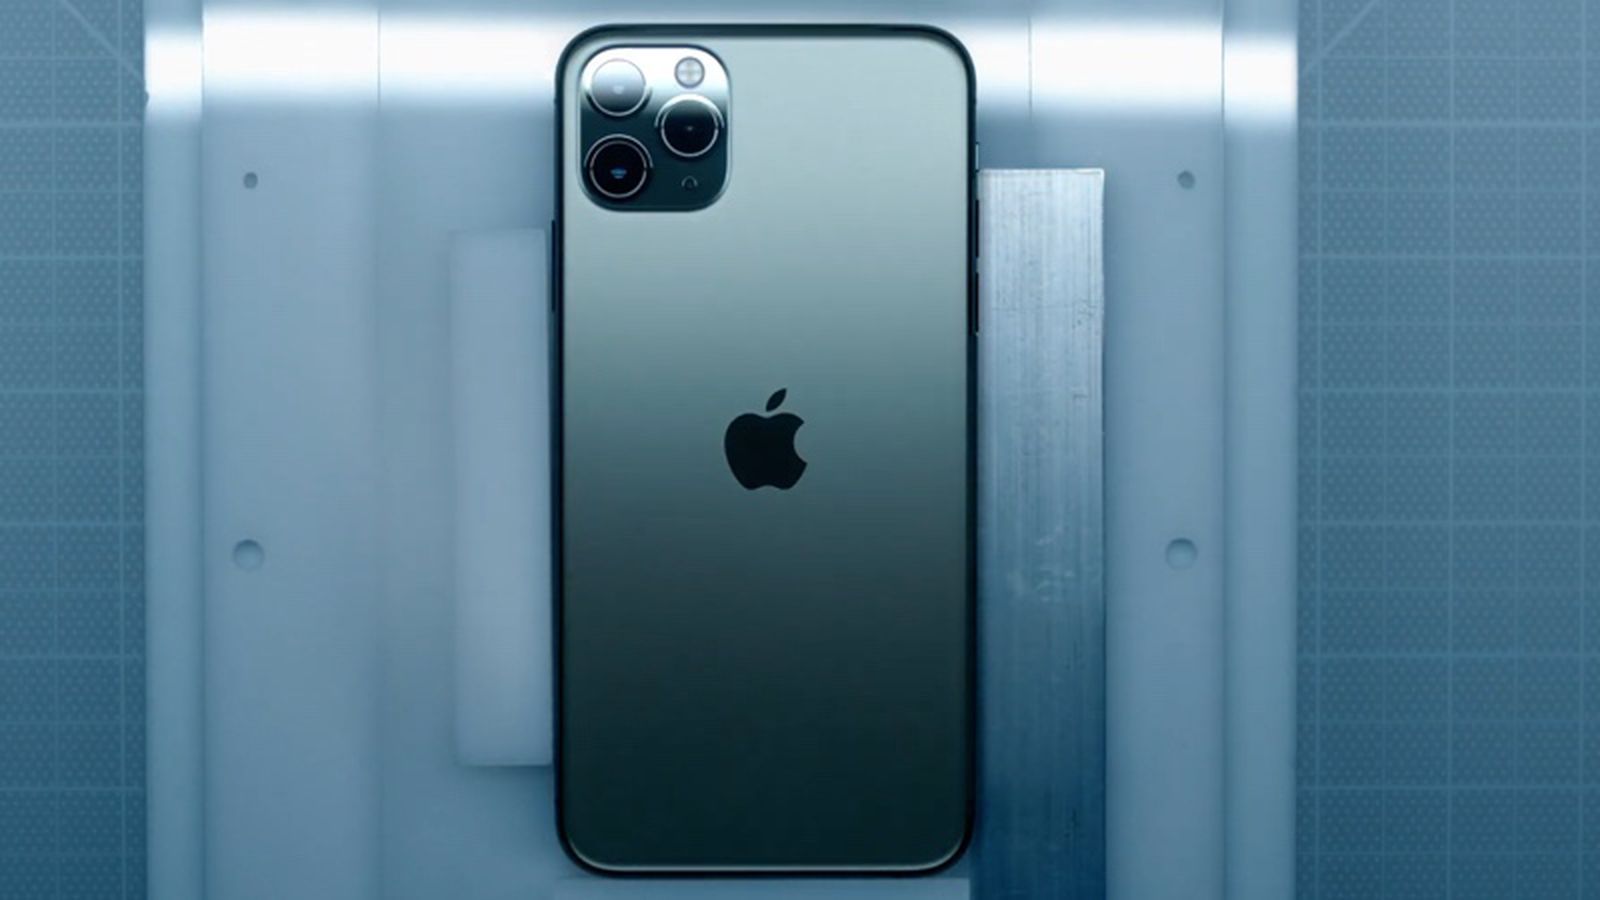 Iphone 11 Pro Models Have Up To 25 Larger Batteries And 4gb Of Ram Per Reliable Tenaa Filings Macrumors